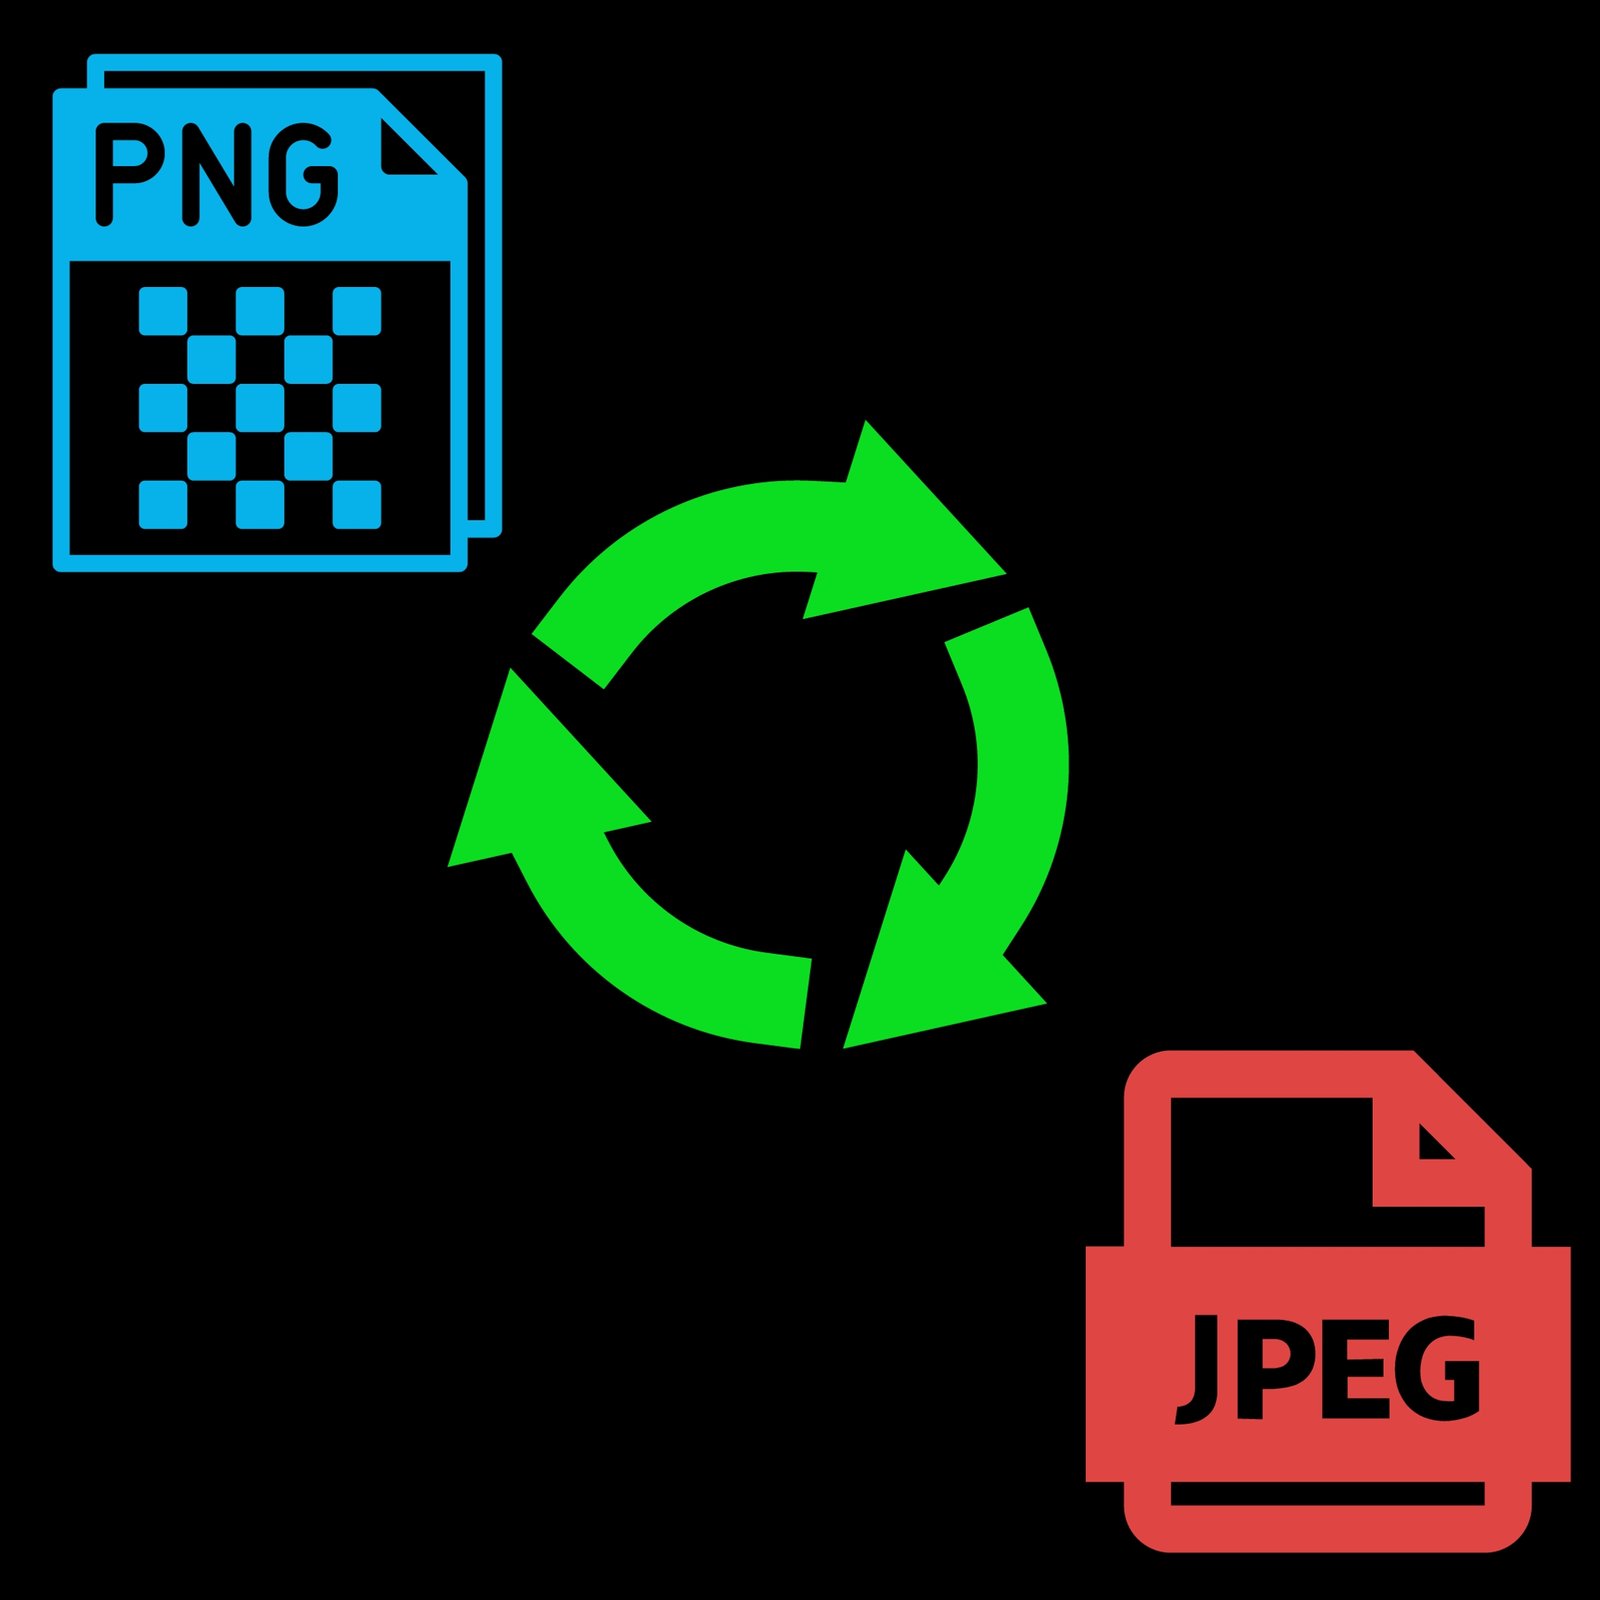 PNG TO JPG Converter